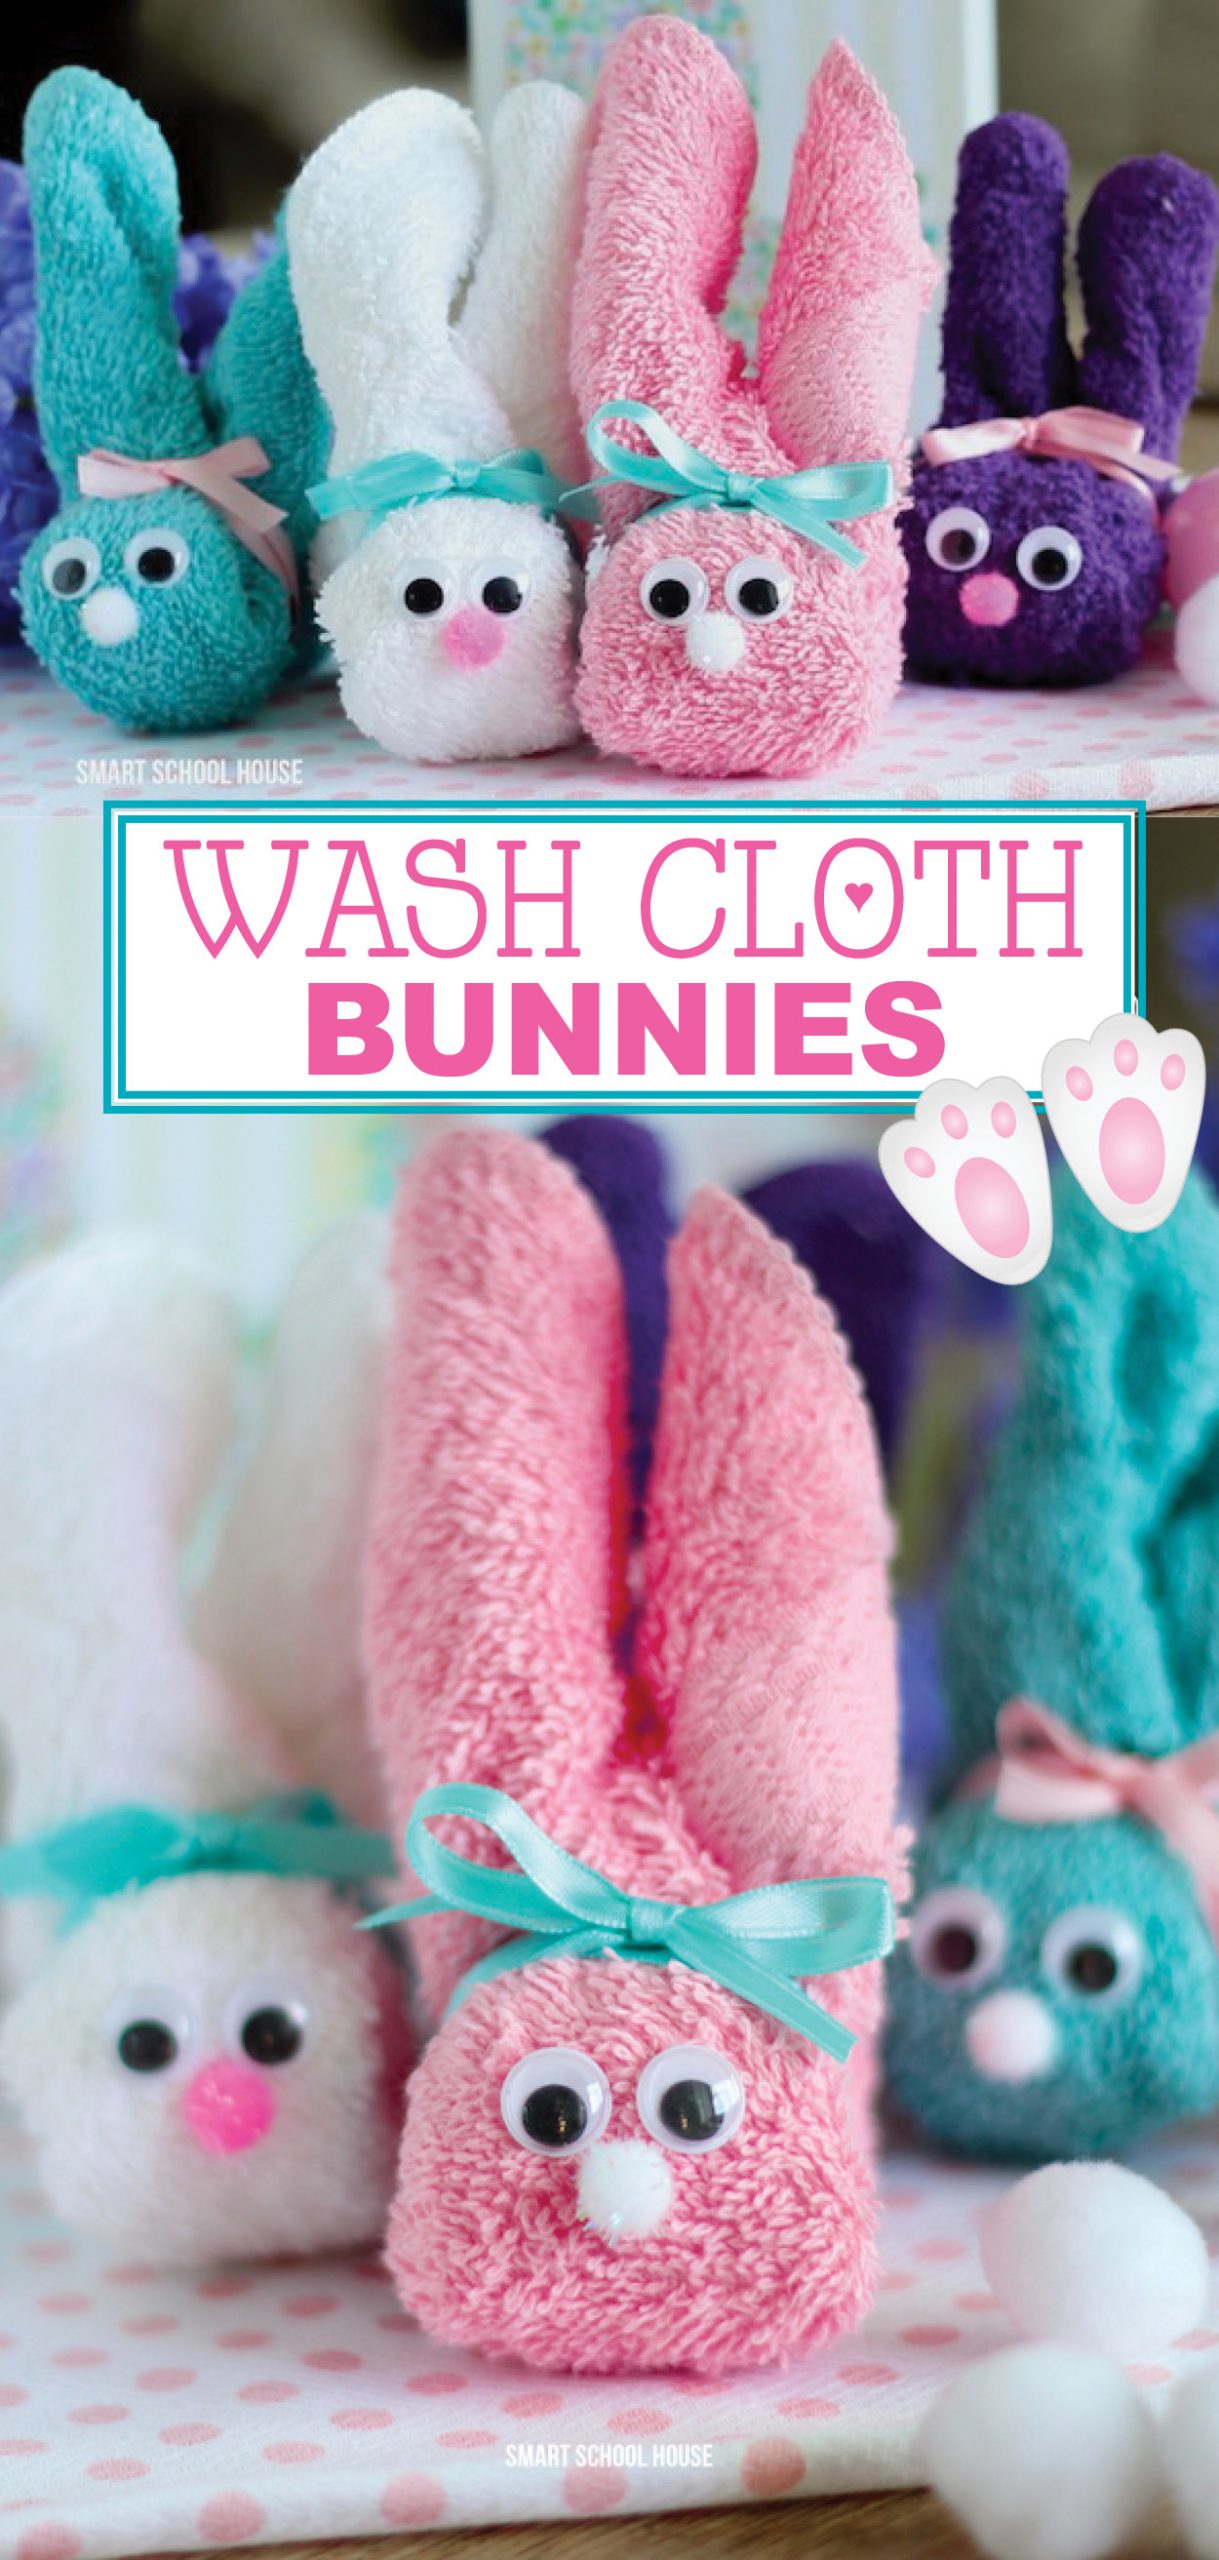 How to make a Wash Cloth Bunny - great for Easter! They are also called boo boo bunnies and you can put ice cubes in them to help soothe boo boos!